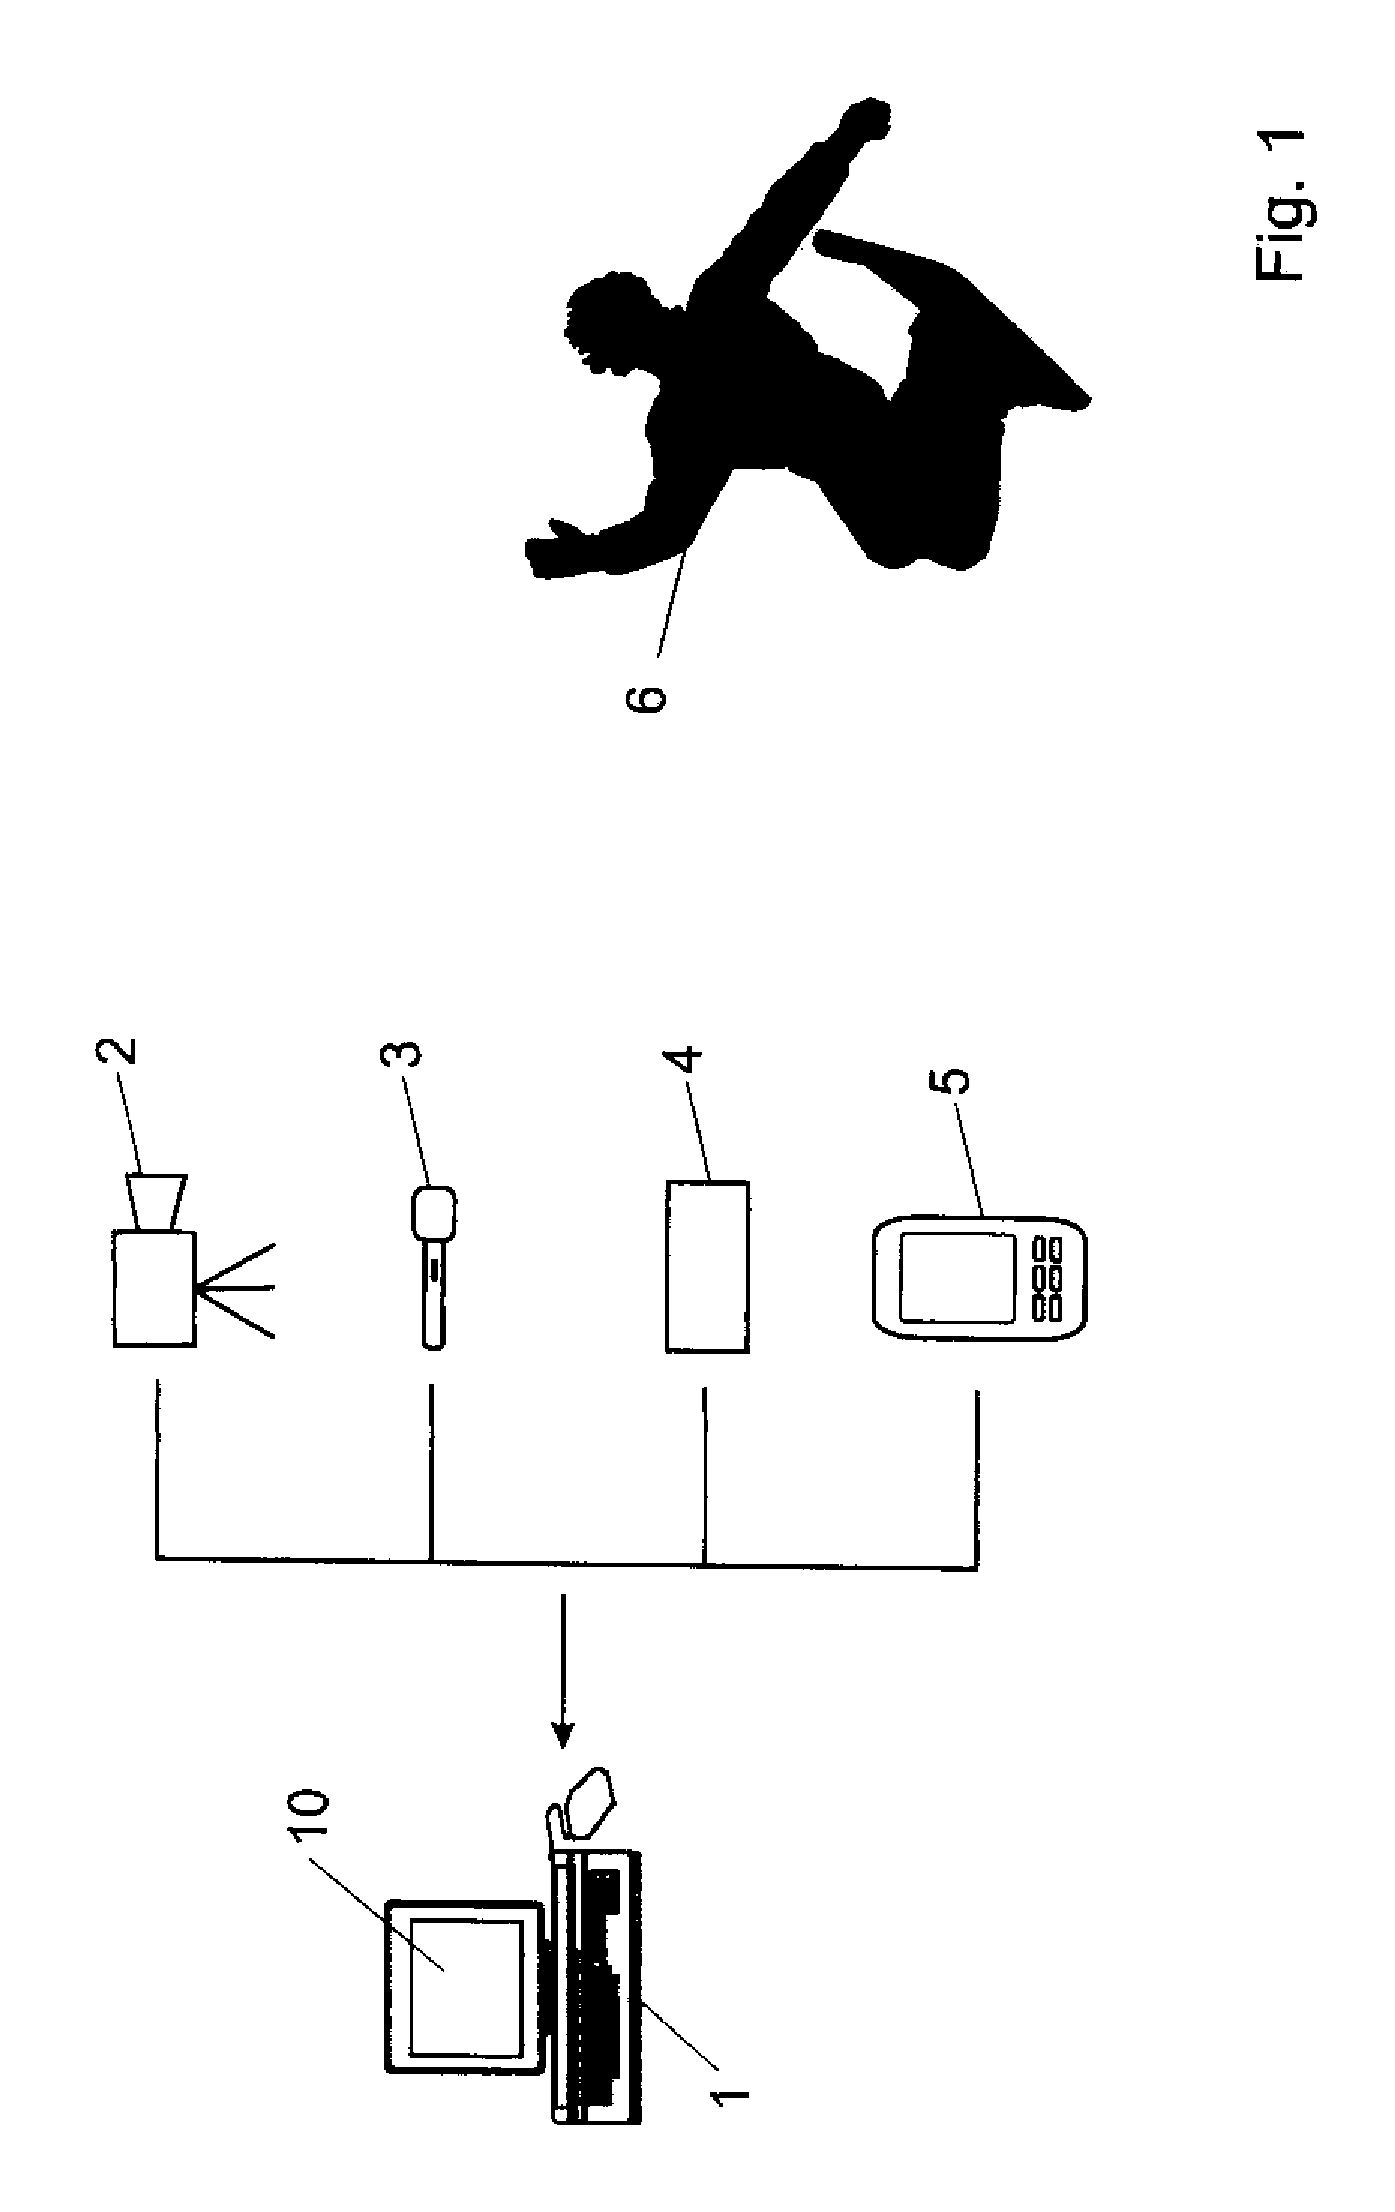 Method for analyzing the motion of a person during an activity